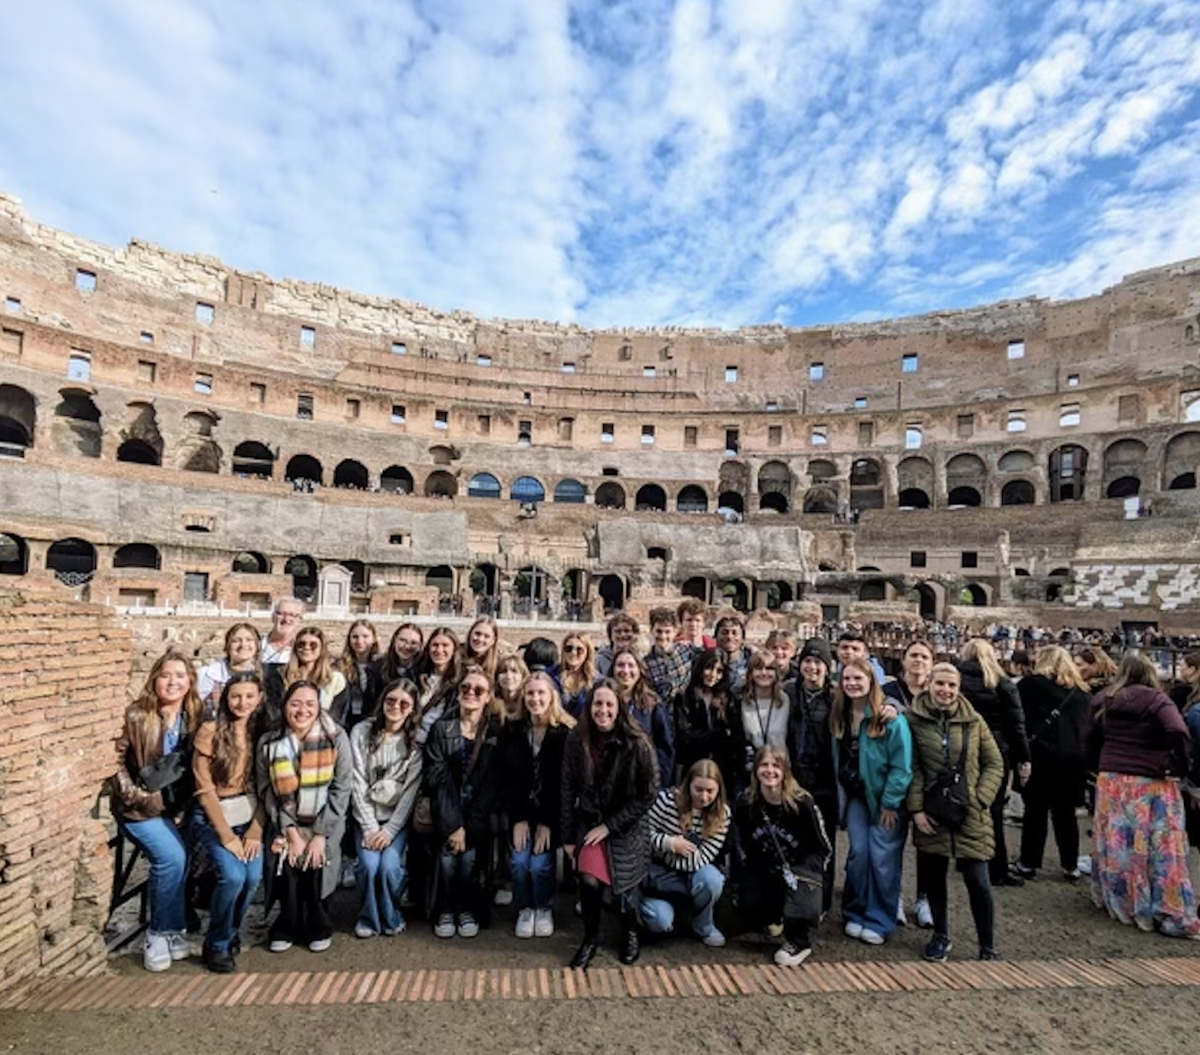 Italy Intersession Trip attendees visited Colosseum, a famous amphitheater located in Rome.